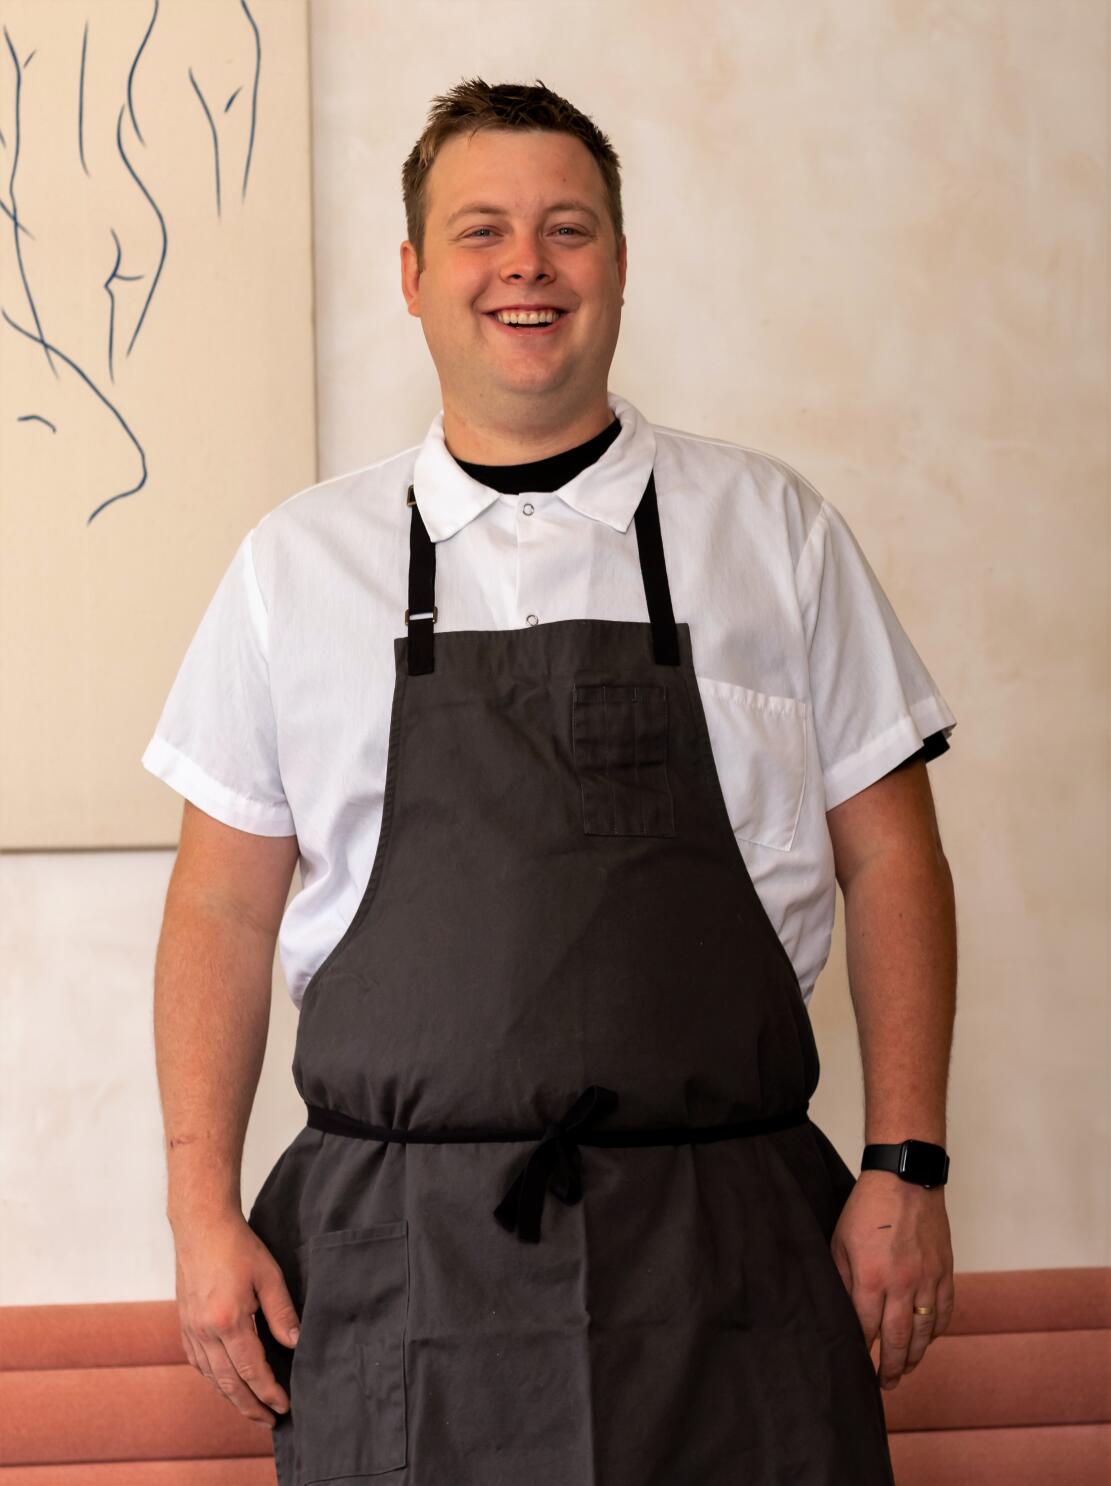 2 Michelin-star Chef, Jean-Pierre Jacob, chef of “Le Bateau Ivre”  restaurant, by Food'n'Chef